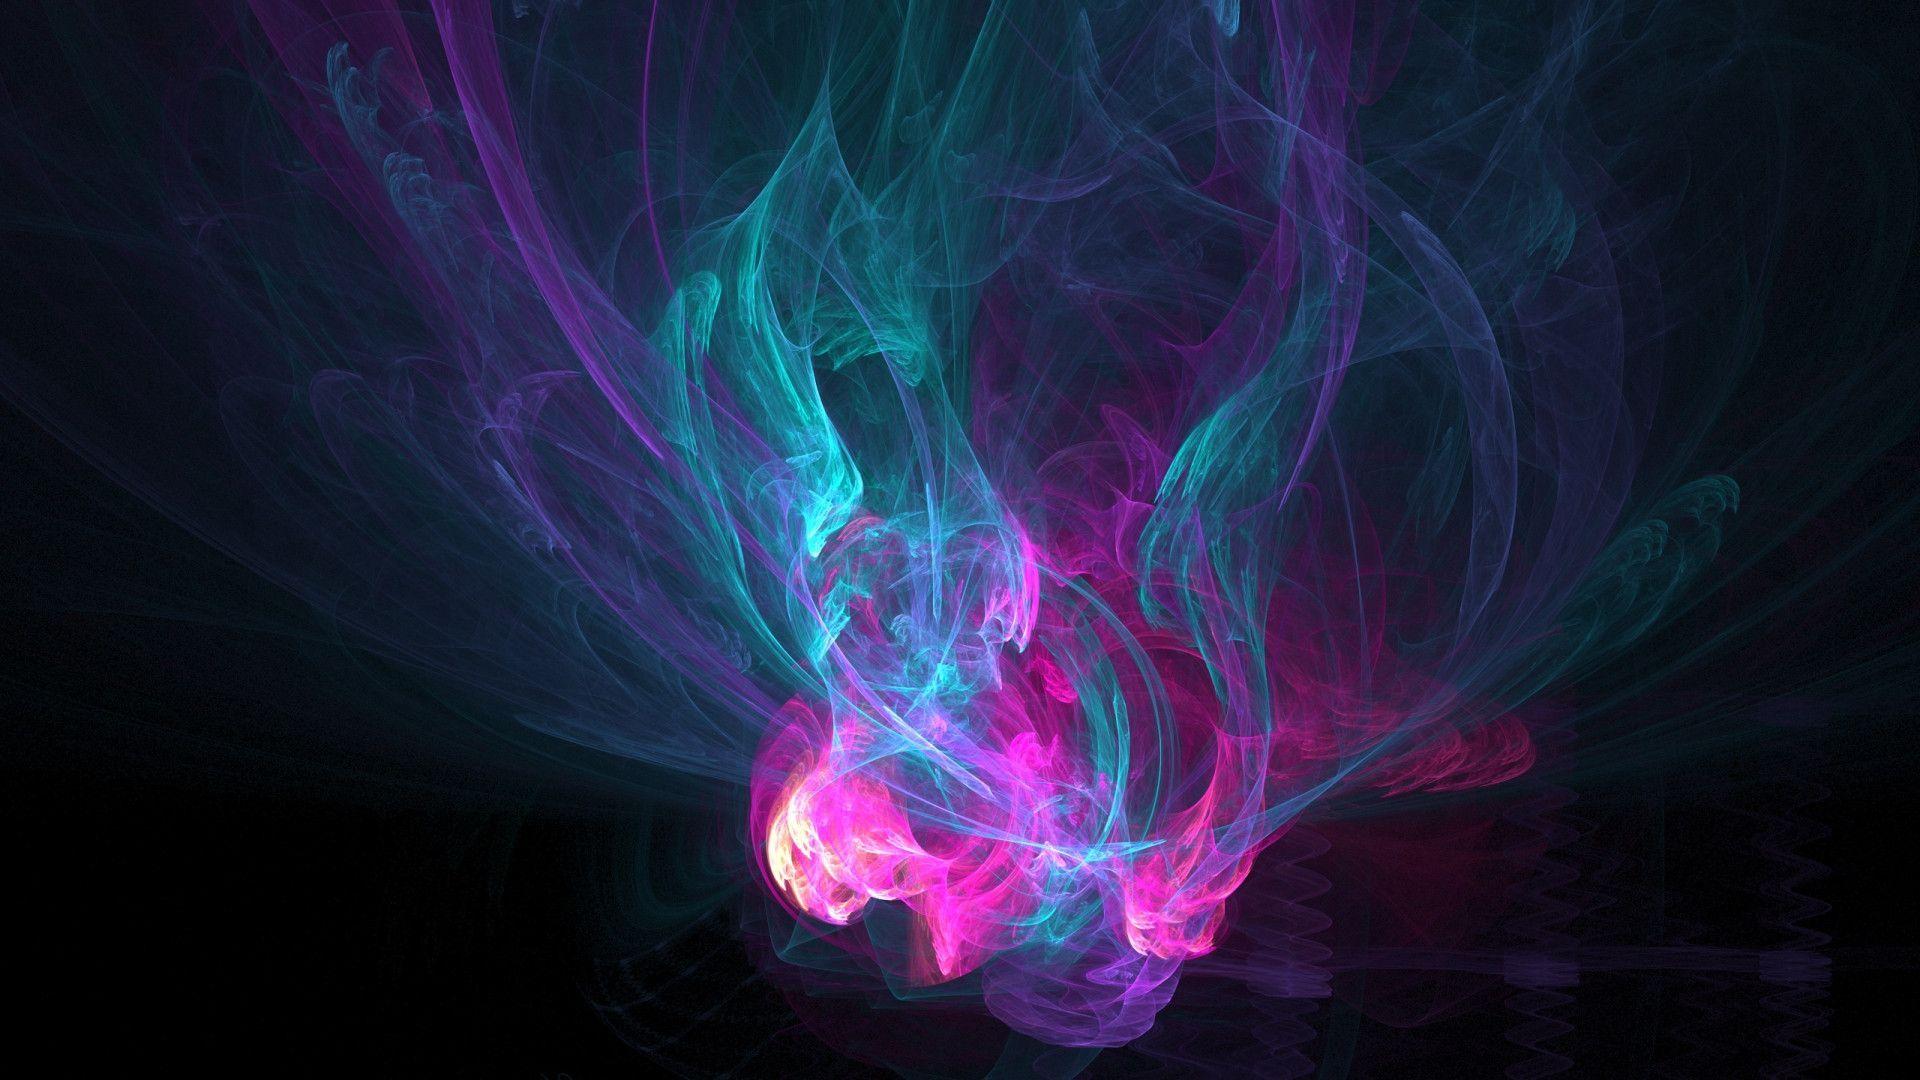 Wallpaper For > Abstract Blue And Purple Wallpaper